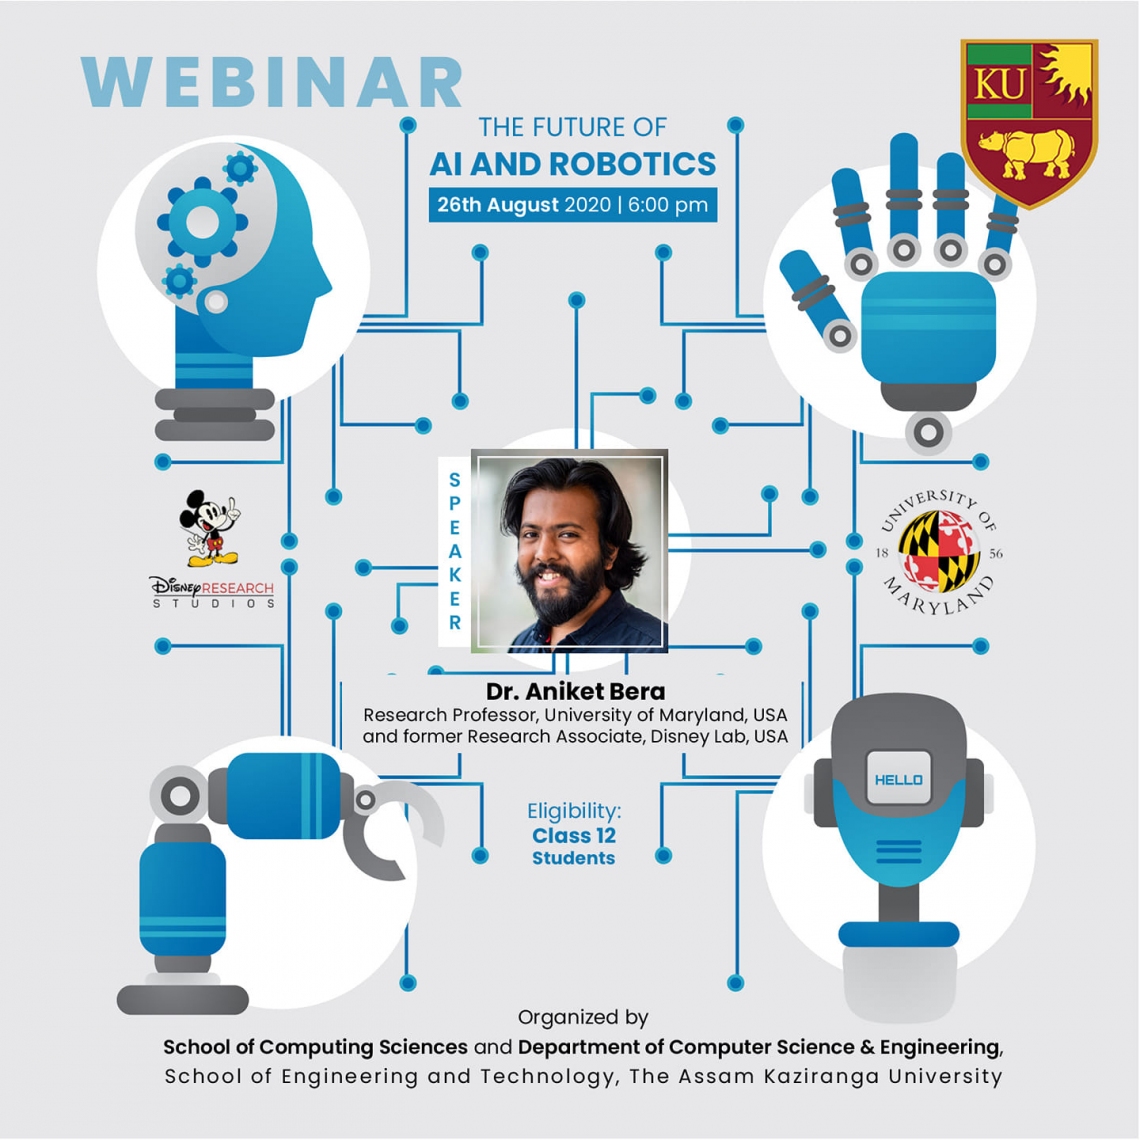 Webinar on the topic, "The future of AI and Robotics" with expert Dr. Aniket Bera, Research Professor, University of Maryland, USA and former Research Associate, Disney Lab, USA